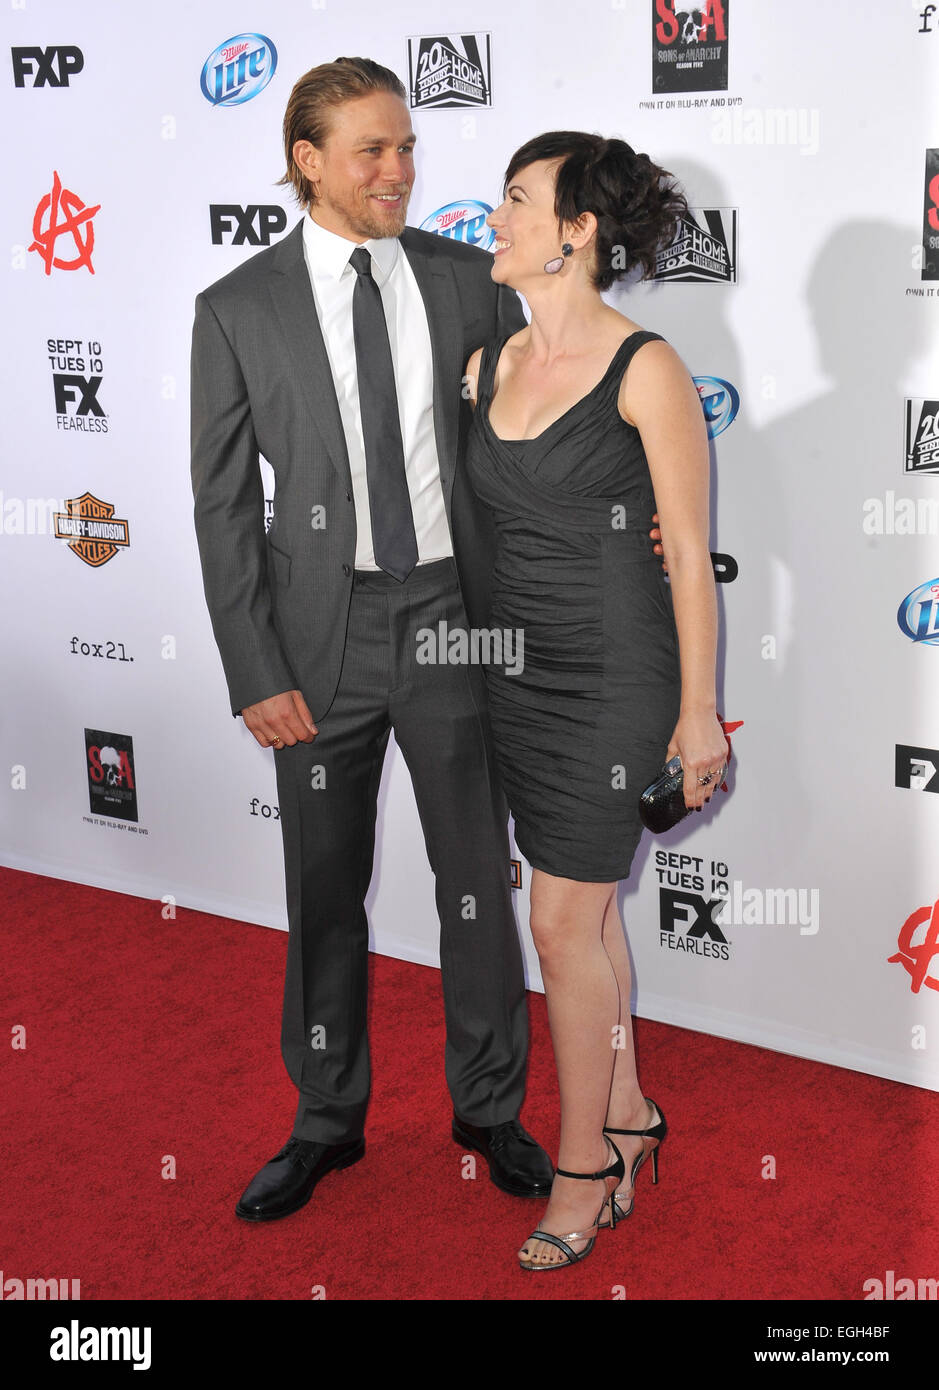 LOS ANGELES, CA - SEPTEMBER 7, 2013: Charlie Hunnam & Maggie Siff at the season 6 premiere of 'Sons of Anarchy' at the Dolby Theatre, Hollywood. Stock Photo